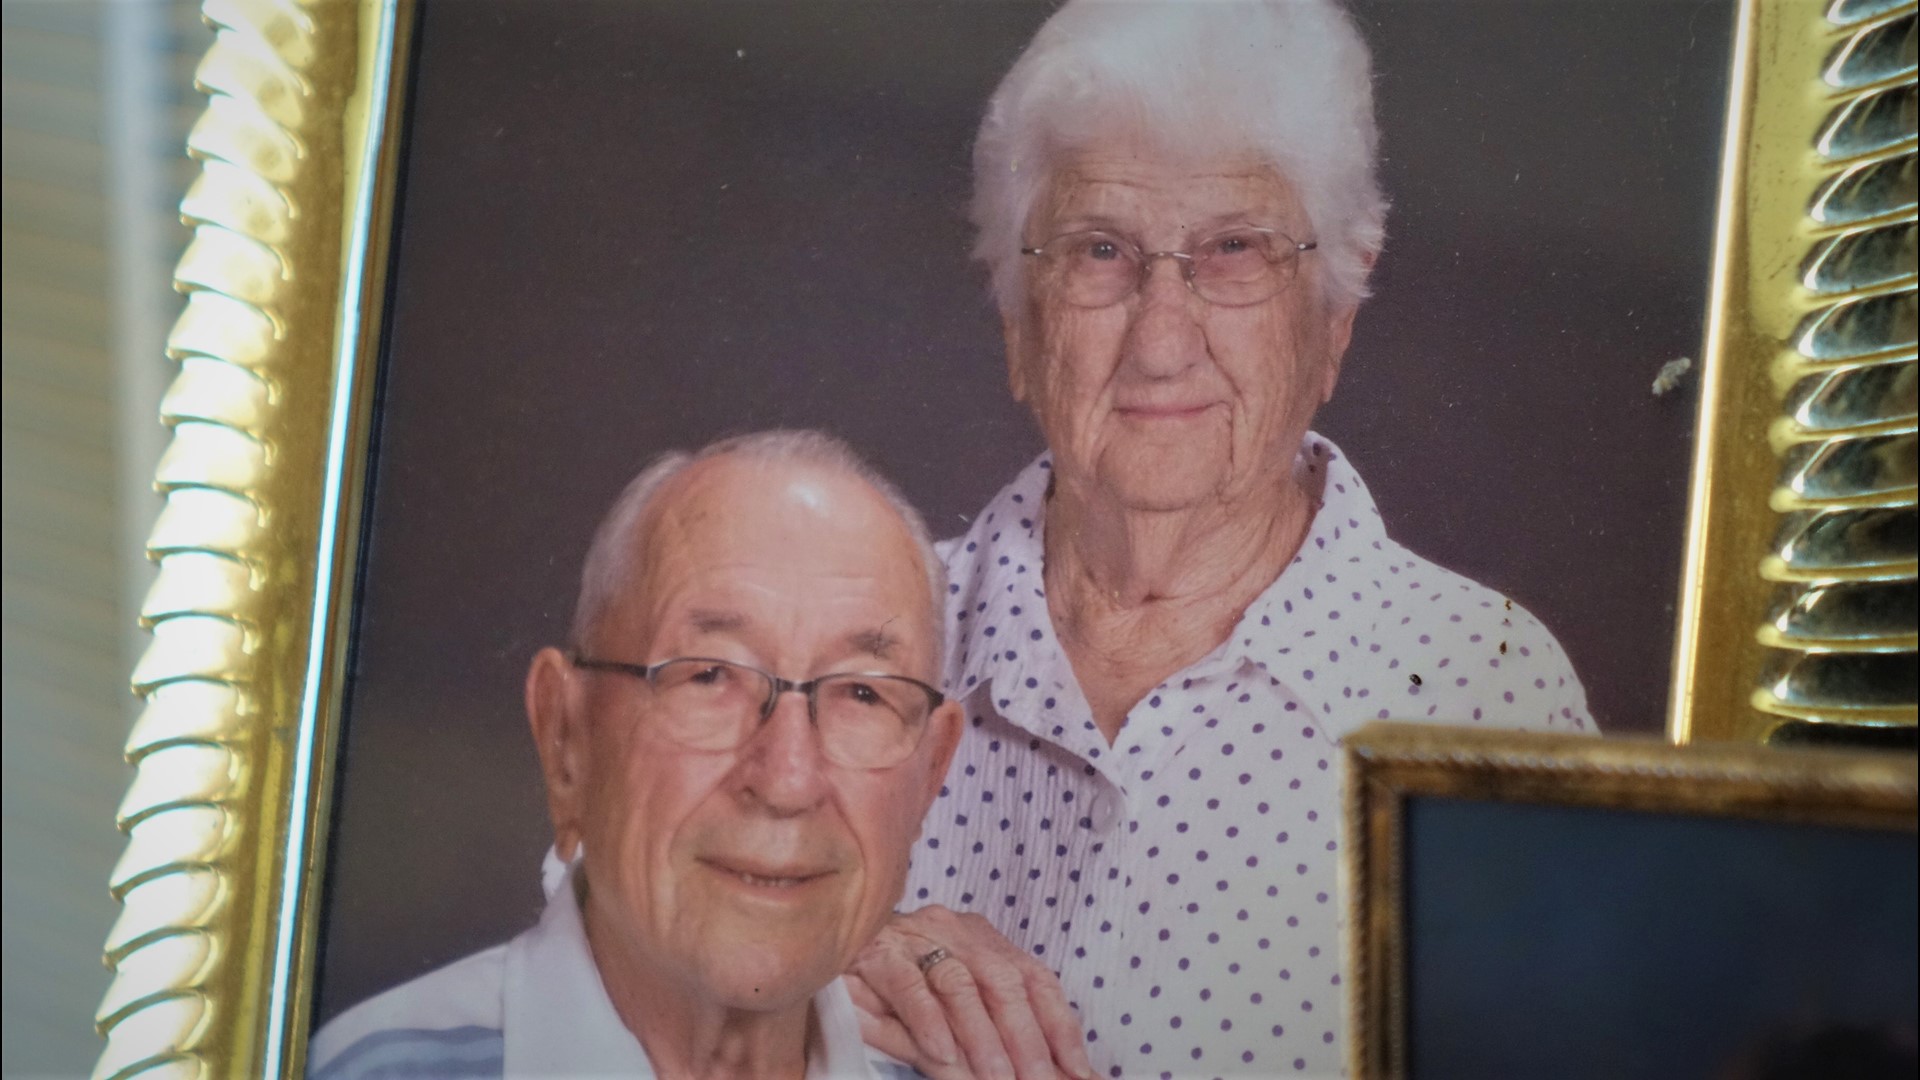 This Johnson County couple has beaten the odds when it comes to both marriage and longevity.